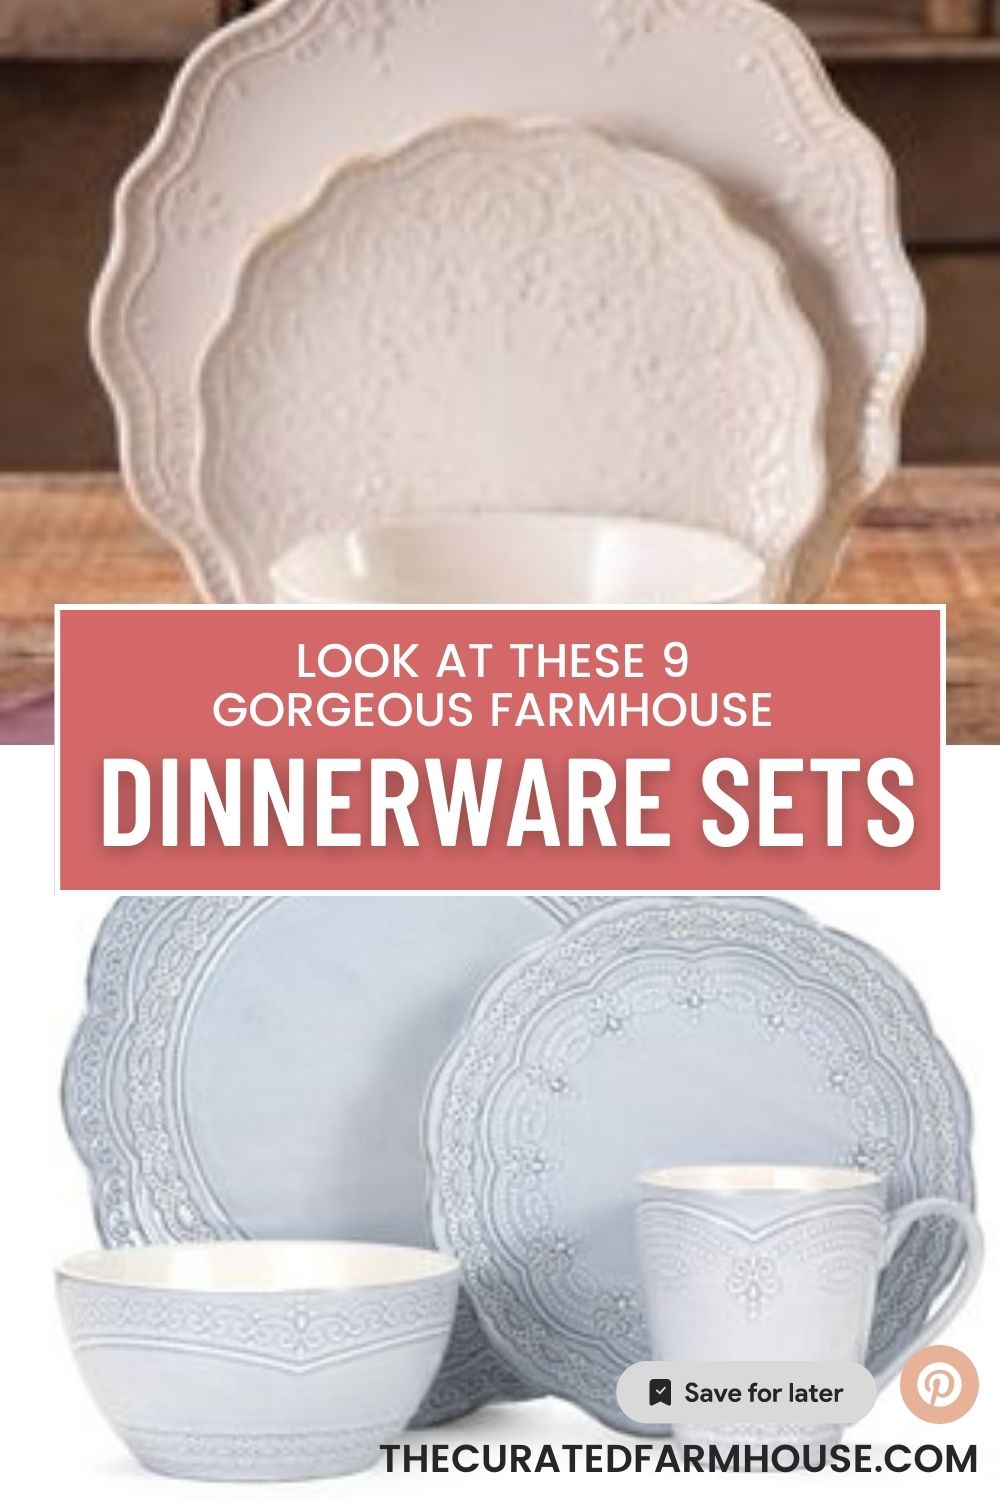 Look at These 9 Gorgeous Farmhouse Dinnerware Sets